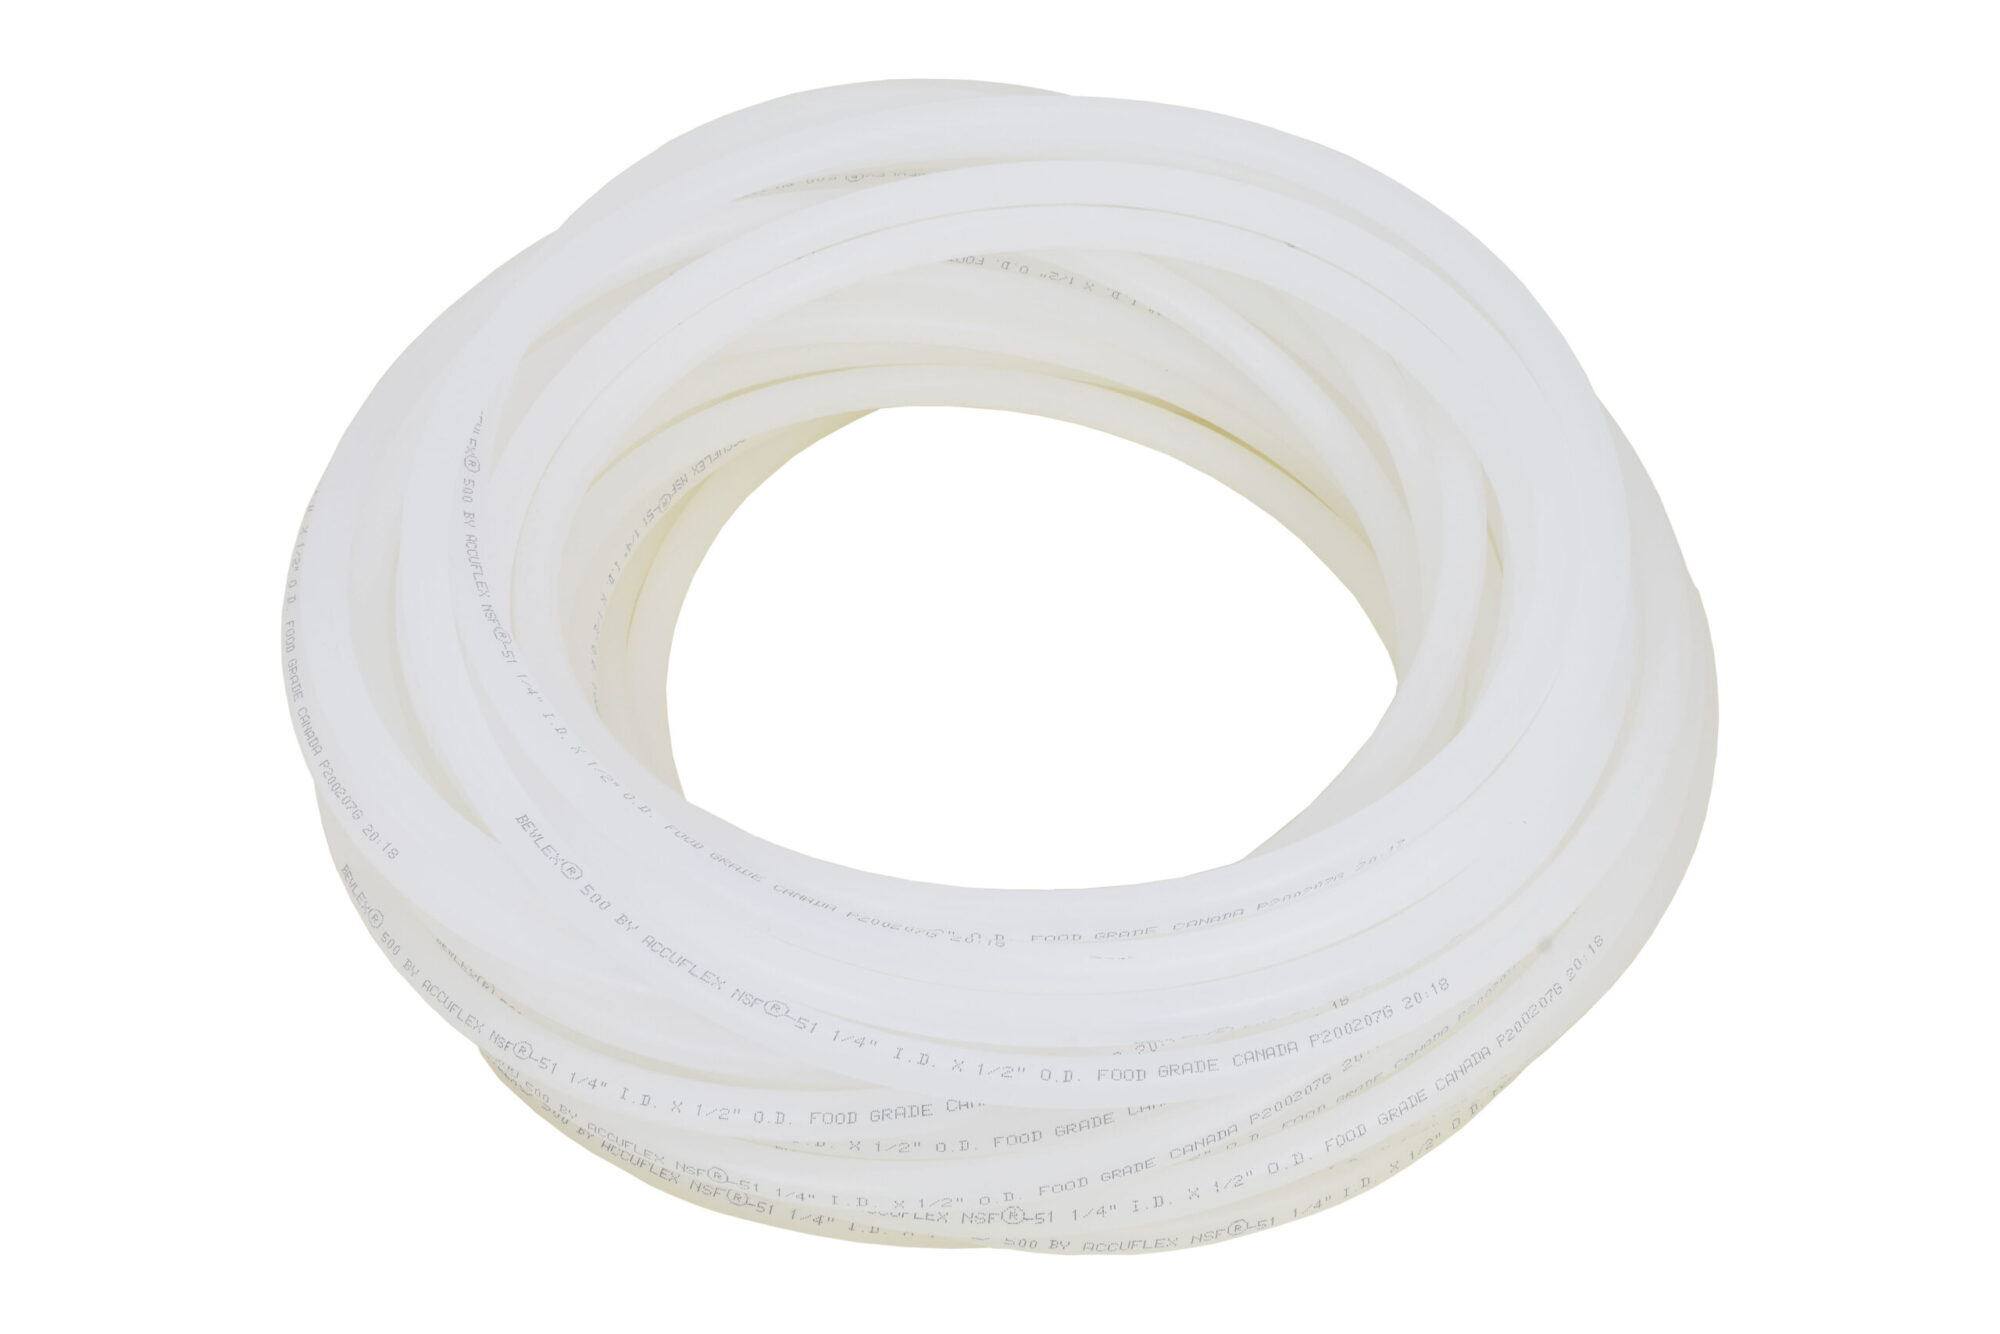 600AB Bevlex 500 Tubing in 3/16" ID. This Tubing is Translucent, Non-PVC, FDA and NSF51 Compliant